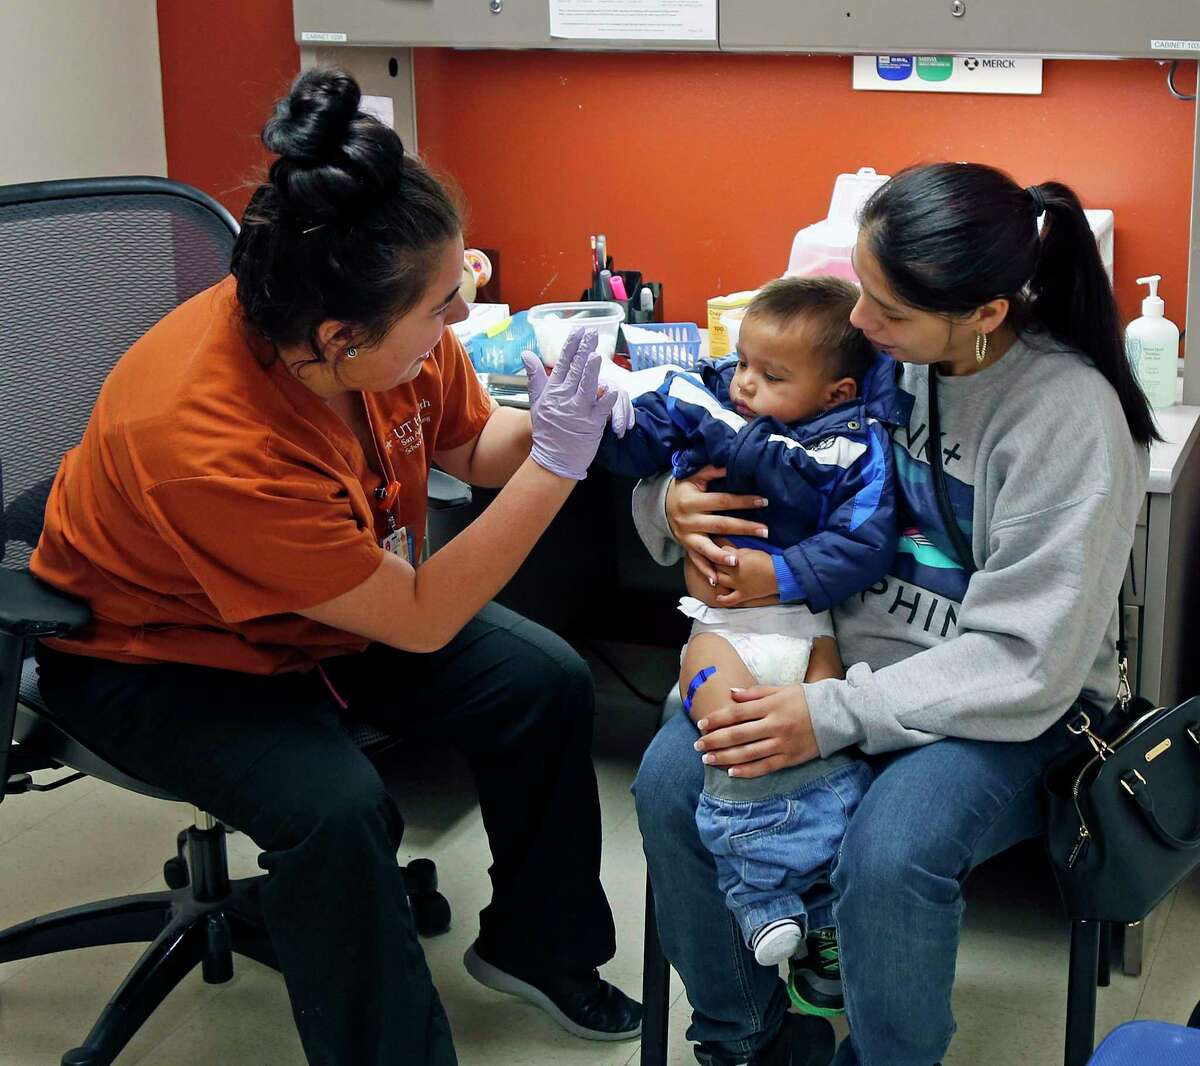 The pandemic has changed how nursing is taught, and students are helping with COVID-19 screening. Here, a nursing student with UT Health San Antonio in 2018 gives a flu shot to a child.